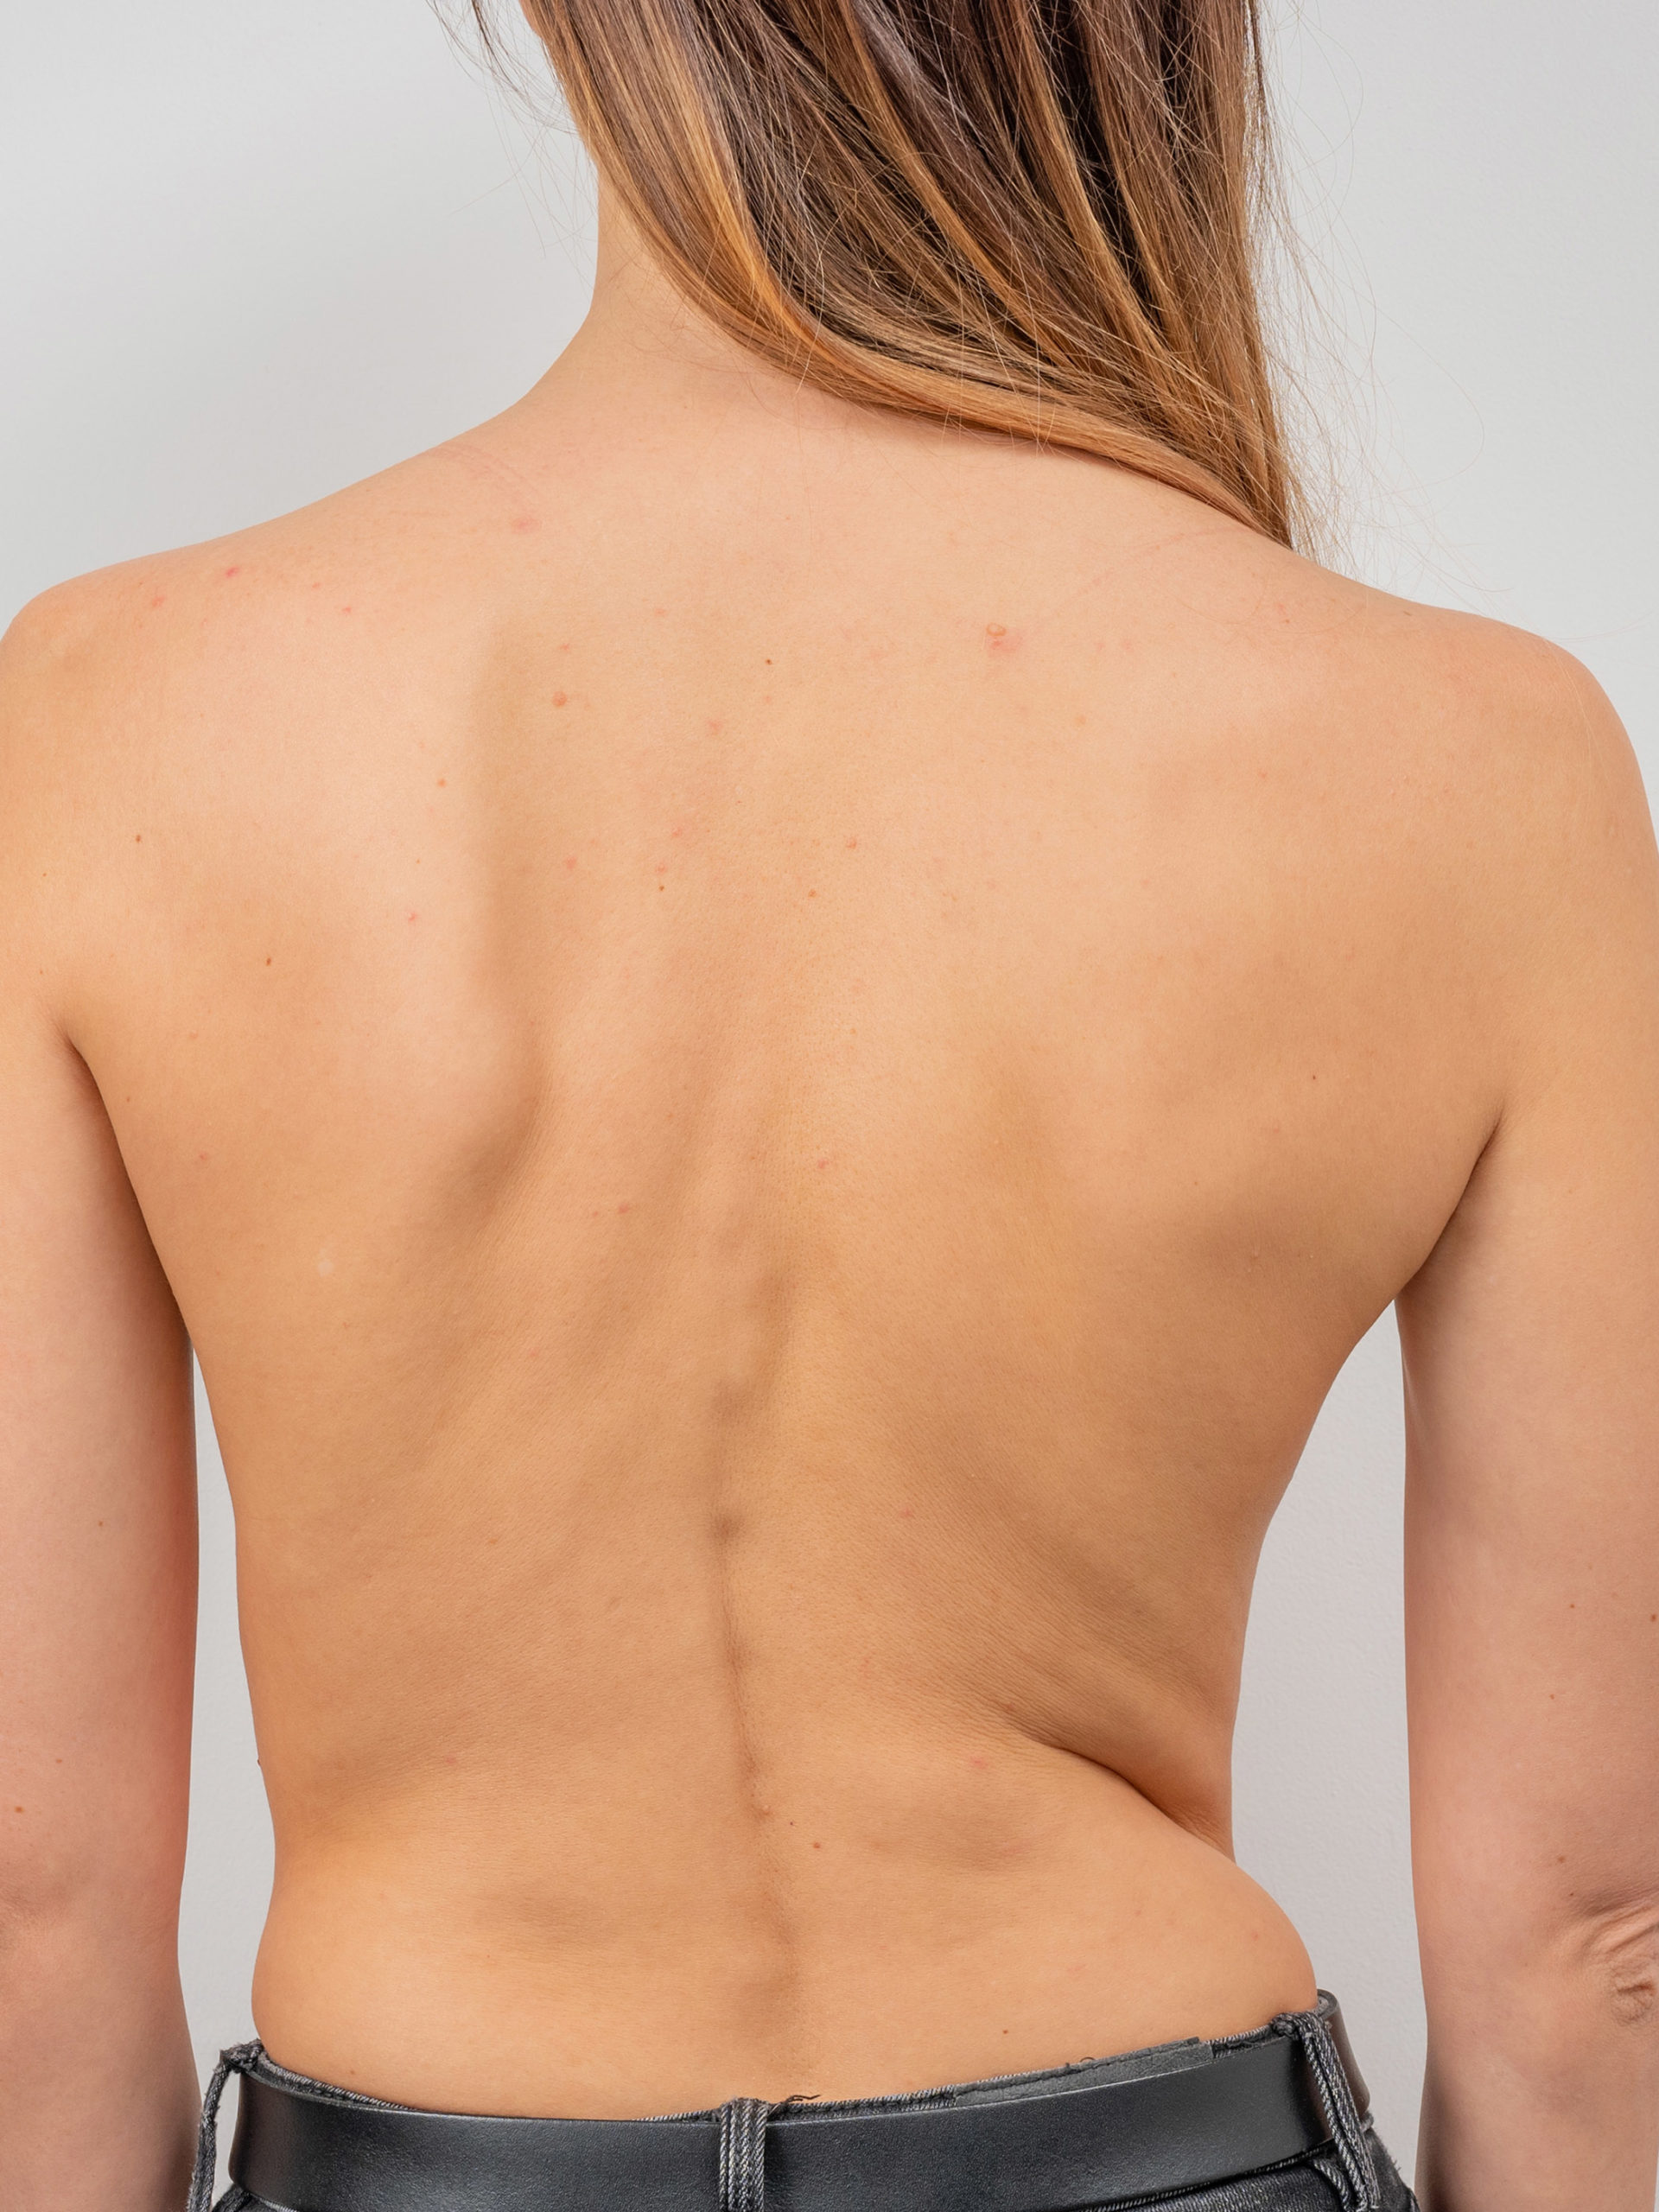 Young woman's bare back with scoliosis of the spine